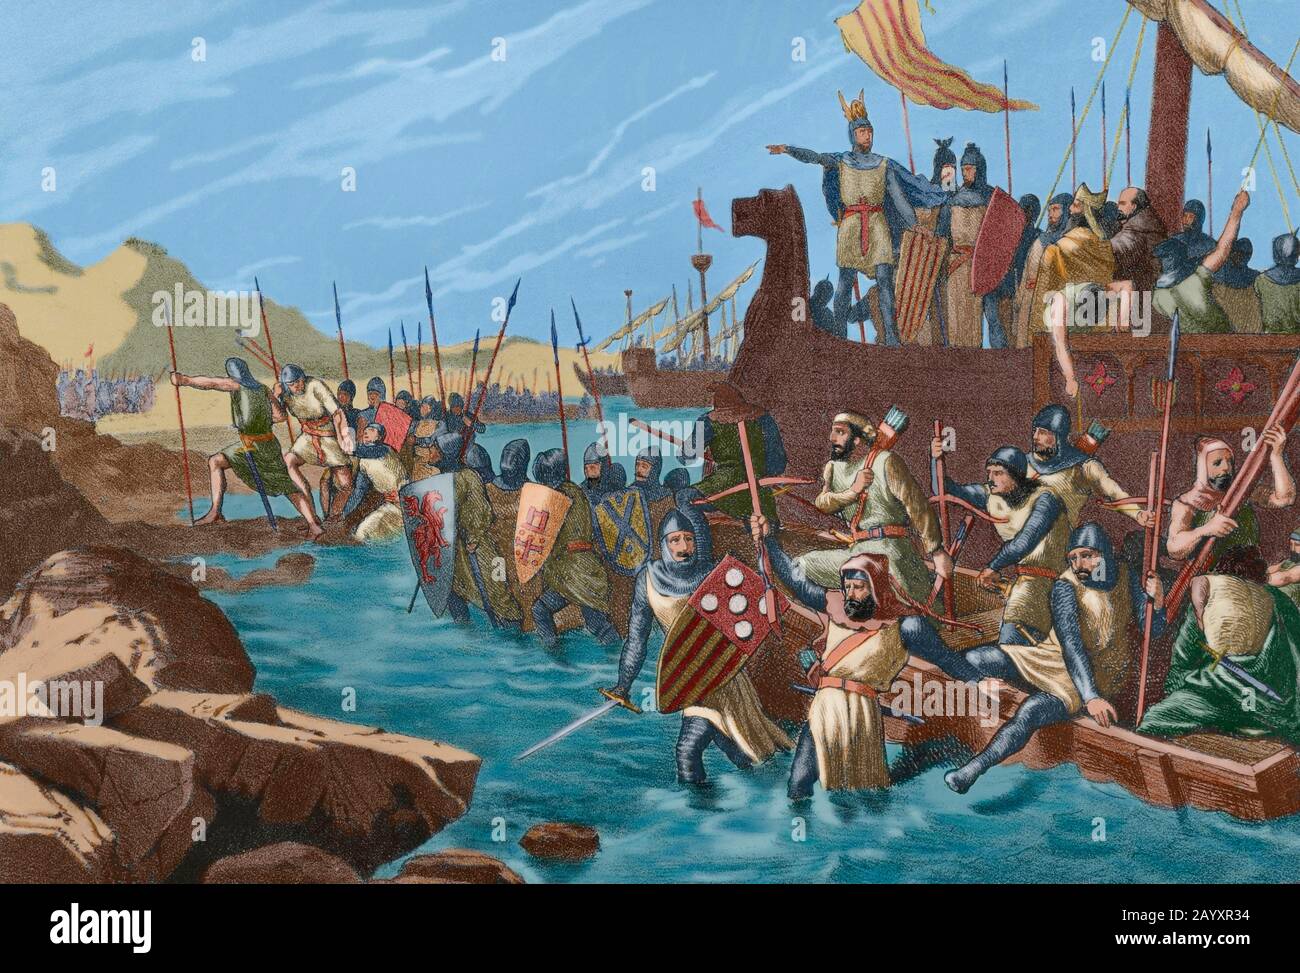 Conquest of the island of Majorca by Christian king James I of Aragon. He landed on the beach of Santa Ponsa at midnight on September 10, 1229. Troops reaching the coast. Lithography. Museo Militar, 1883. Later colouration. Stock Photo